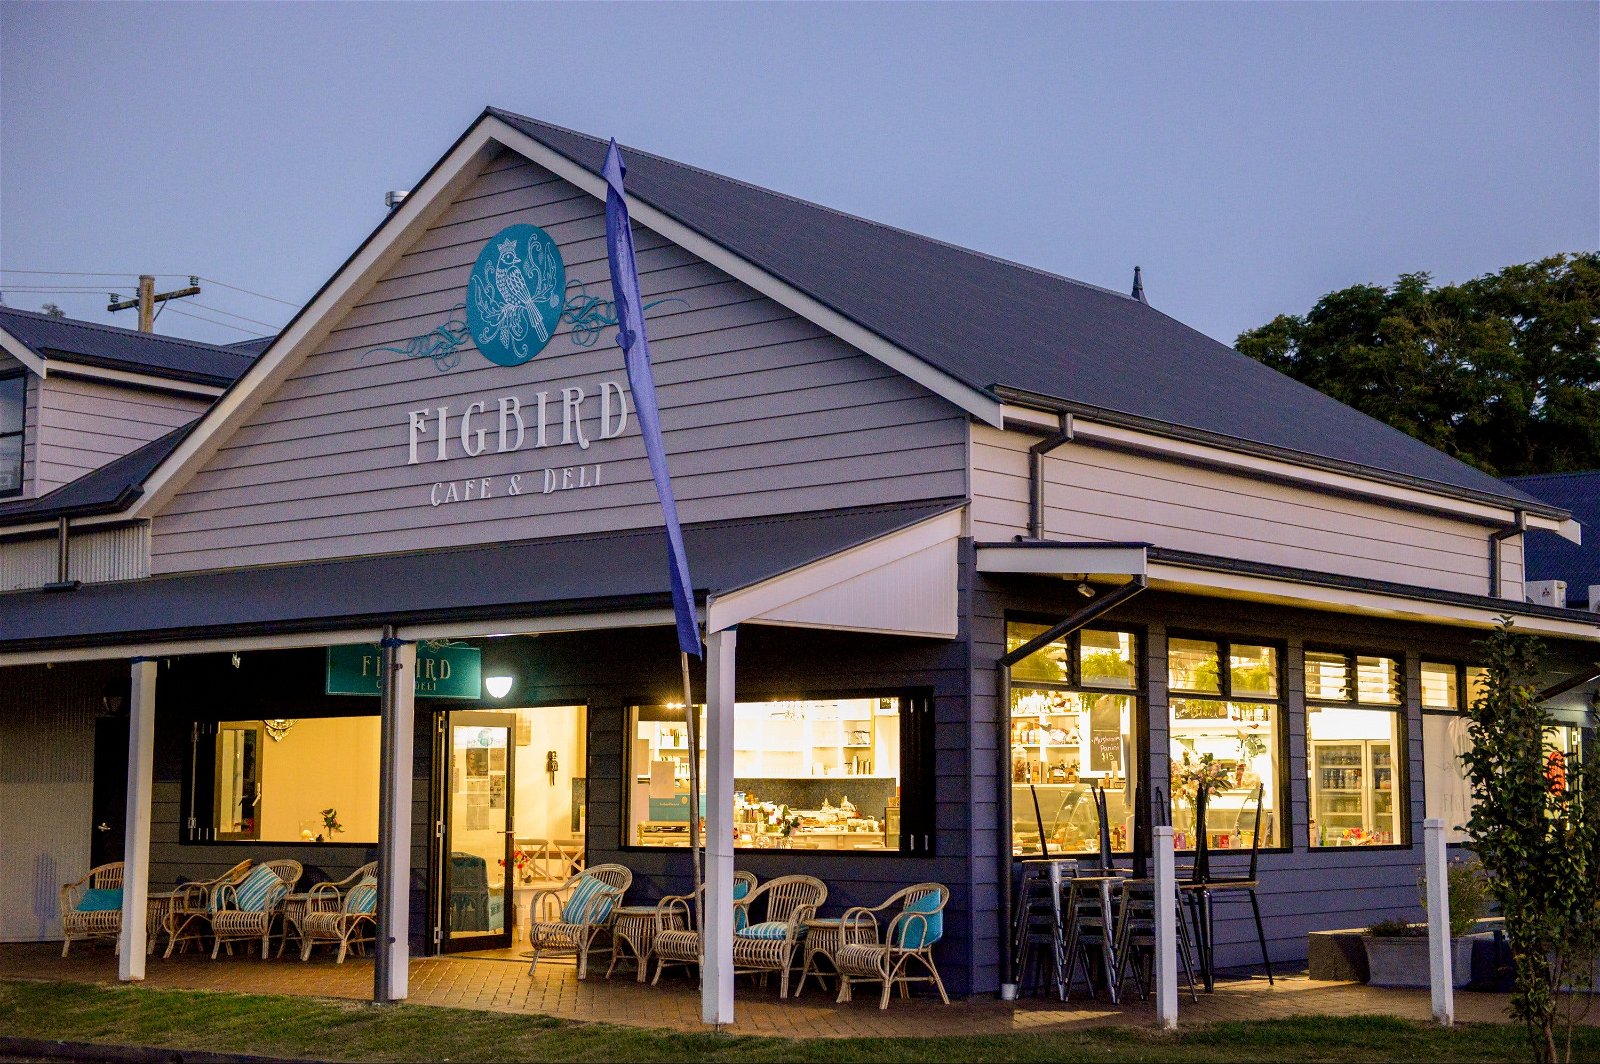 Figbird Cafe and Deli - Broome Tourism